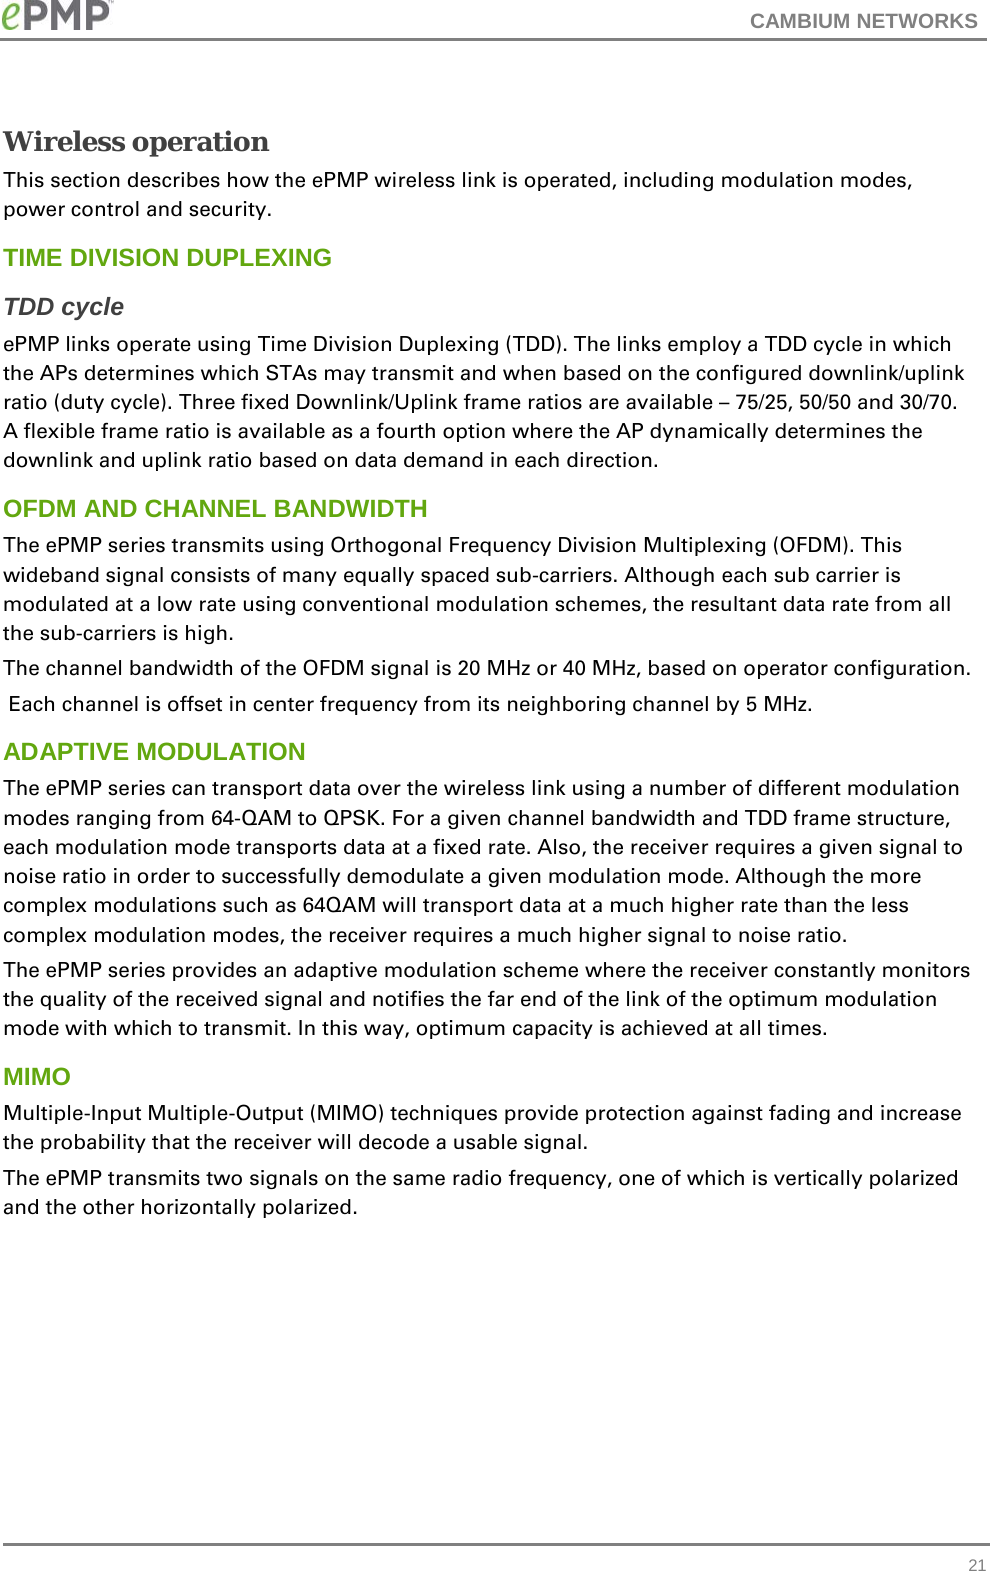 CAMBIUM NETWORKS  Wireless operation This section describes how the ePMP wireless link is operated, including modulation modes, power control and security. TIME DIVISION DUPLEXING TDD cycle ePMP links operate using Time Division Duplexing (TDD). The links employ a TDD cycle in which the APs determines which STAs may transmit and when based on the configured downlink/uplink ratio (duty cycle). Three fixed Downlink/Uplink frame ratios are available – 75/25, 50/50 and 30/70. A flexible frame ratio is available as a fourth option where the AP dynamically determines the downlink and uplink ratio based on data demand in each direction.  OFDM AND CHANNEL BANDWIDTH The ePMP series transmits using Orthogonal Frequency Division Multiplexing (OFDM). This wideband signal consists of many equally spaced sub-carriers. Although each sub carrier is modulated at a low rate using conventional modulation schemes, the resultant data rate from all the sub-carriers is high.  The channel bandwidth of the OFDM signal is 20 MHz or 40 MHz, based on operator configuration.  Each channel is offset in center frequency from its neighboring channel by 5 MHz.  ADAPTIVE MODULATION The ePMP series can transport data over the wireless link using a number of different modulation modes ranging from 64-QAM to QPSK. For a given channel bandwidth and TDD frame structure, each modulation mode transports data at a fixed rate. Also, the receiver requires a given signal to noise ratio in order to successfully demodulate a given modulation mode. Although the more complex modulations such as 64QAM will transport data at a much higher rate than the less complex modulation modes, the receiver requires a much higher signal to noise ratio. The ePMP series provides an adaptive modulation scheme where the receiver constantly monitors the quality of the received signal and notifies the far end of the link of the optimum modulation mode with which to transmit. In this way, optimum capacity is achieved at all times.  MIMO Multiple-Input Multiple-Output (MIMO) techniques provide protection against fading and increase the probability that the receiver will decode a usable signal.  The ePMP transmits two signals on the same radio frequency, one of which is vertically polarized and the other horizontally polarized.   21 